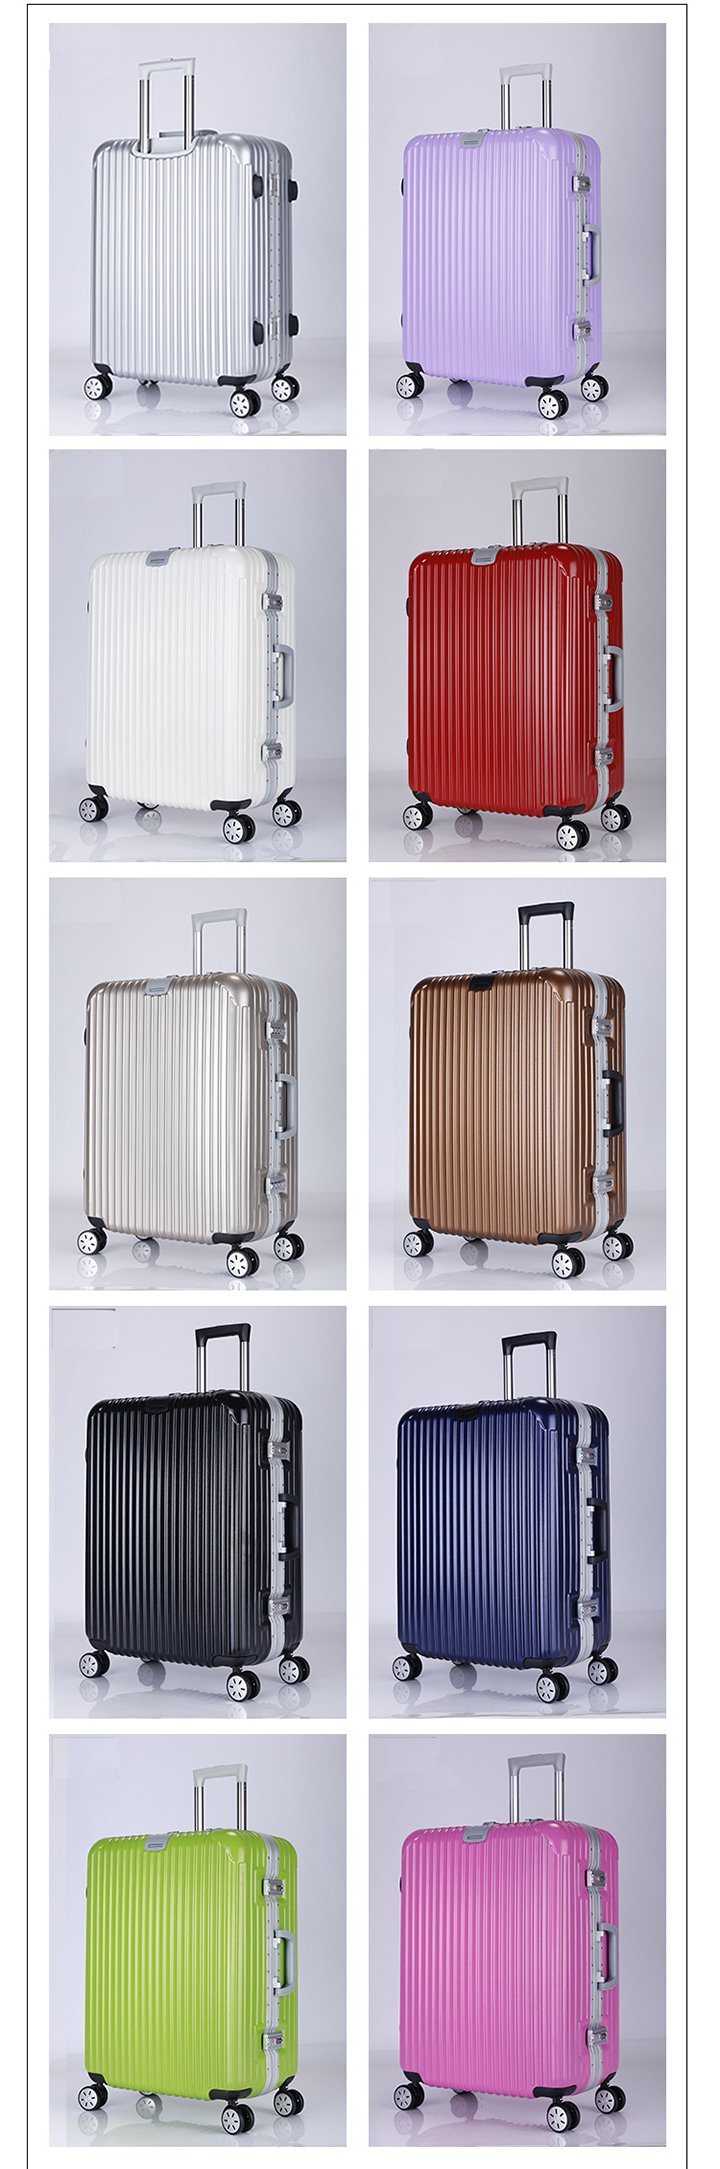 New Style PC Business Polo Suitcases Luggage Case